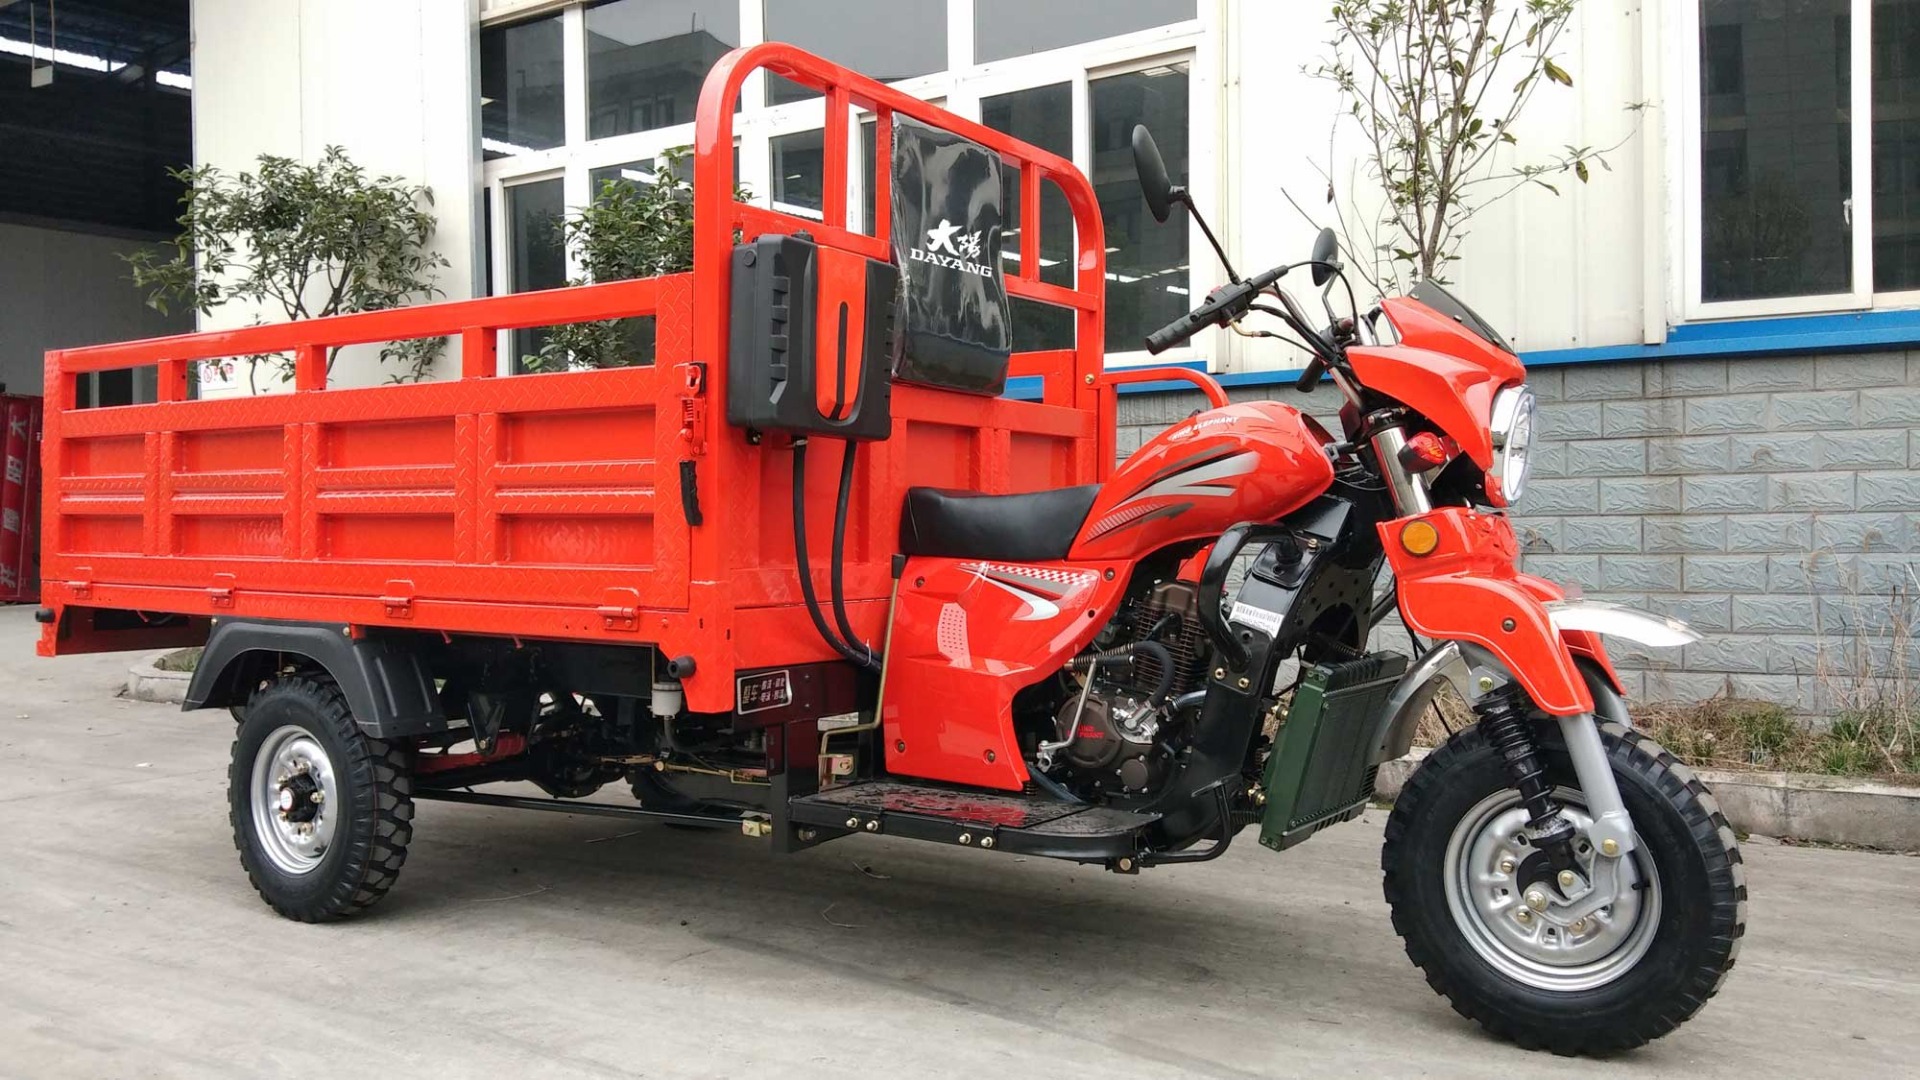 2021 DAYANG motorized tricycle 3 wheels dumper truck 1 ton carrying cargo motorcycle Safe durable Automatic